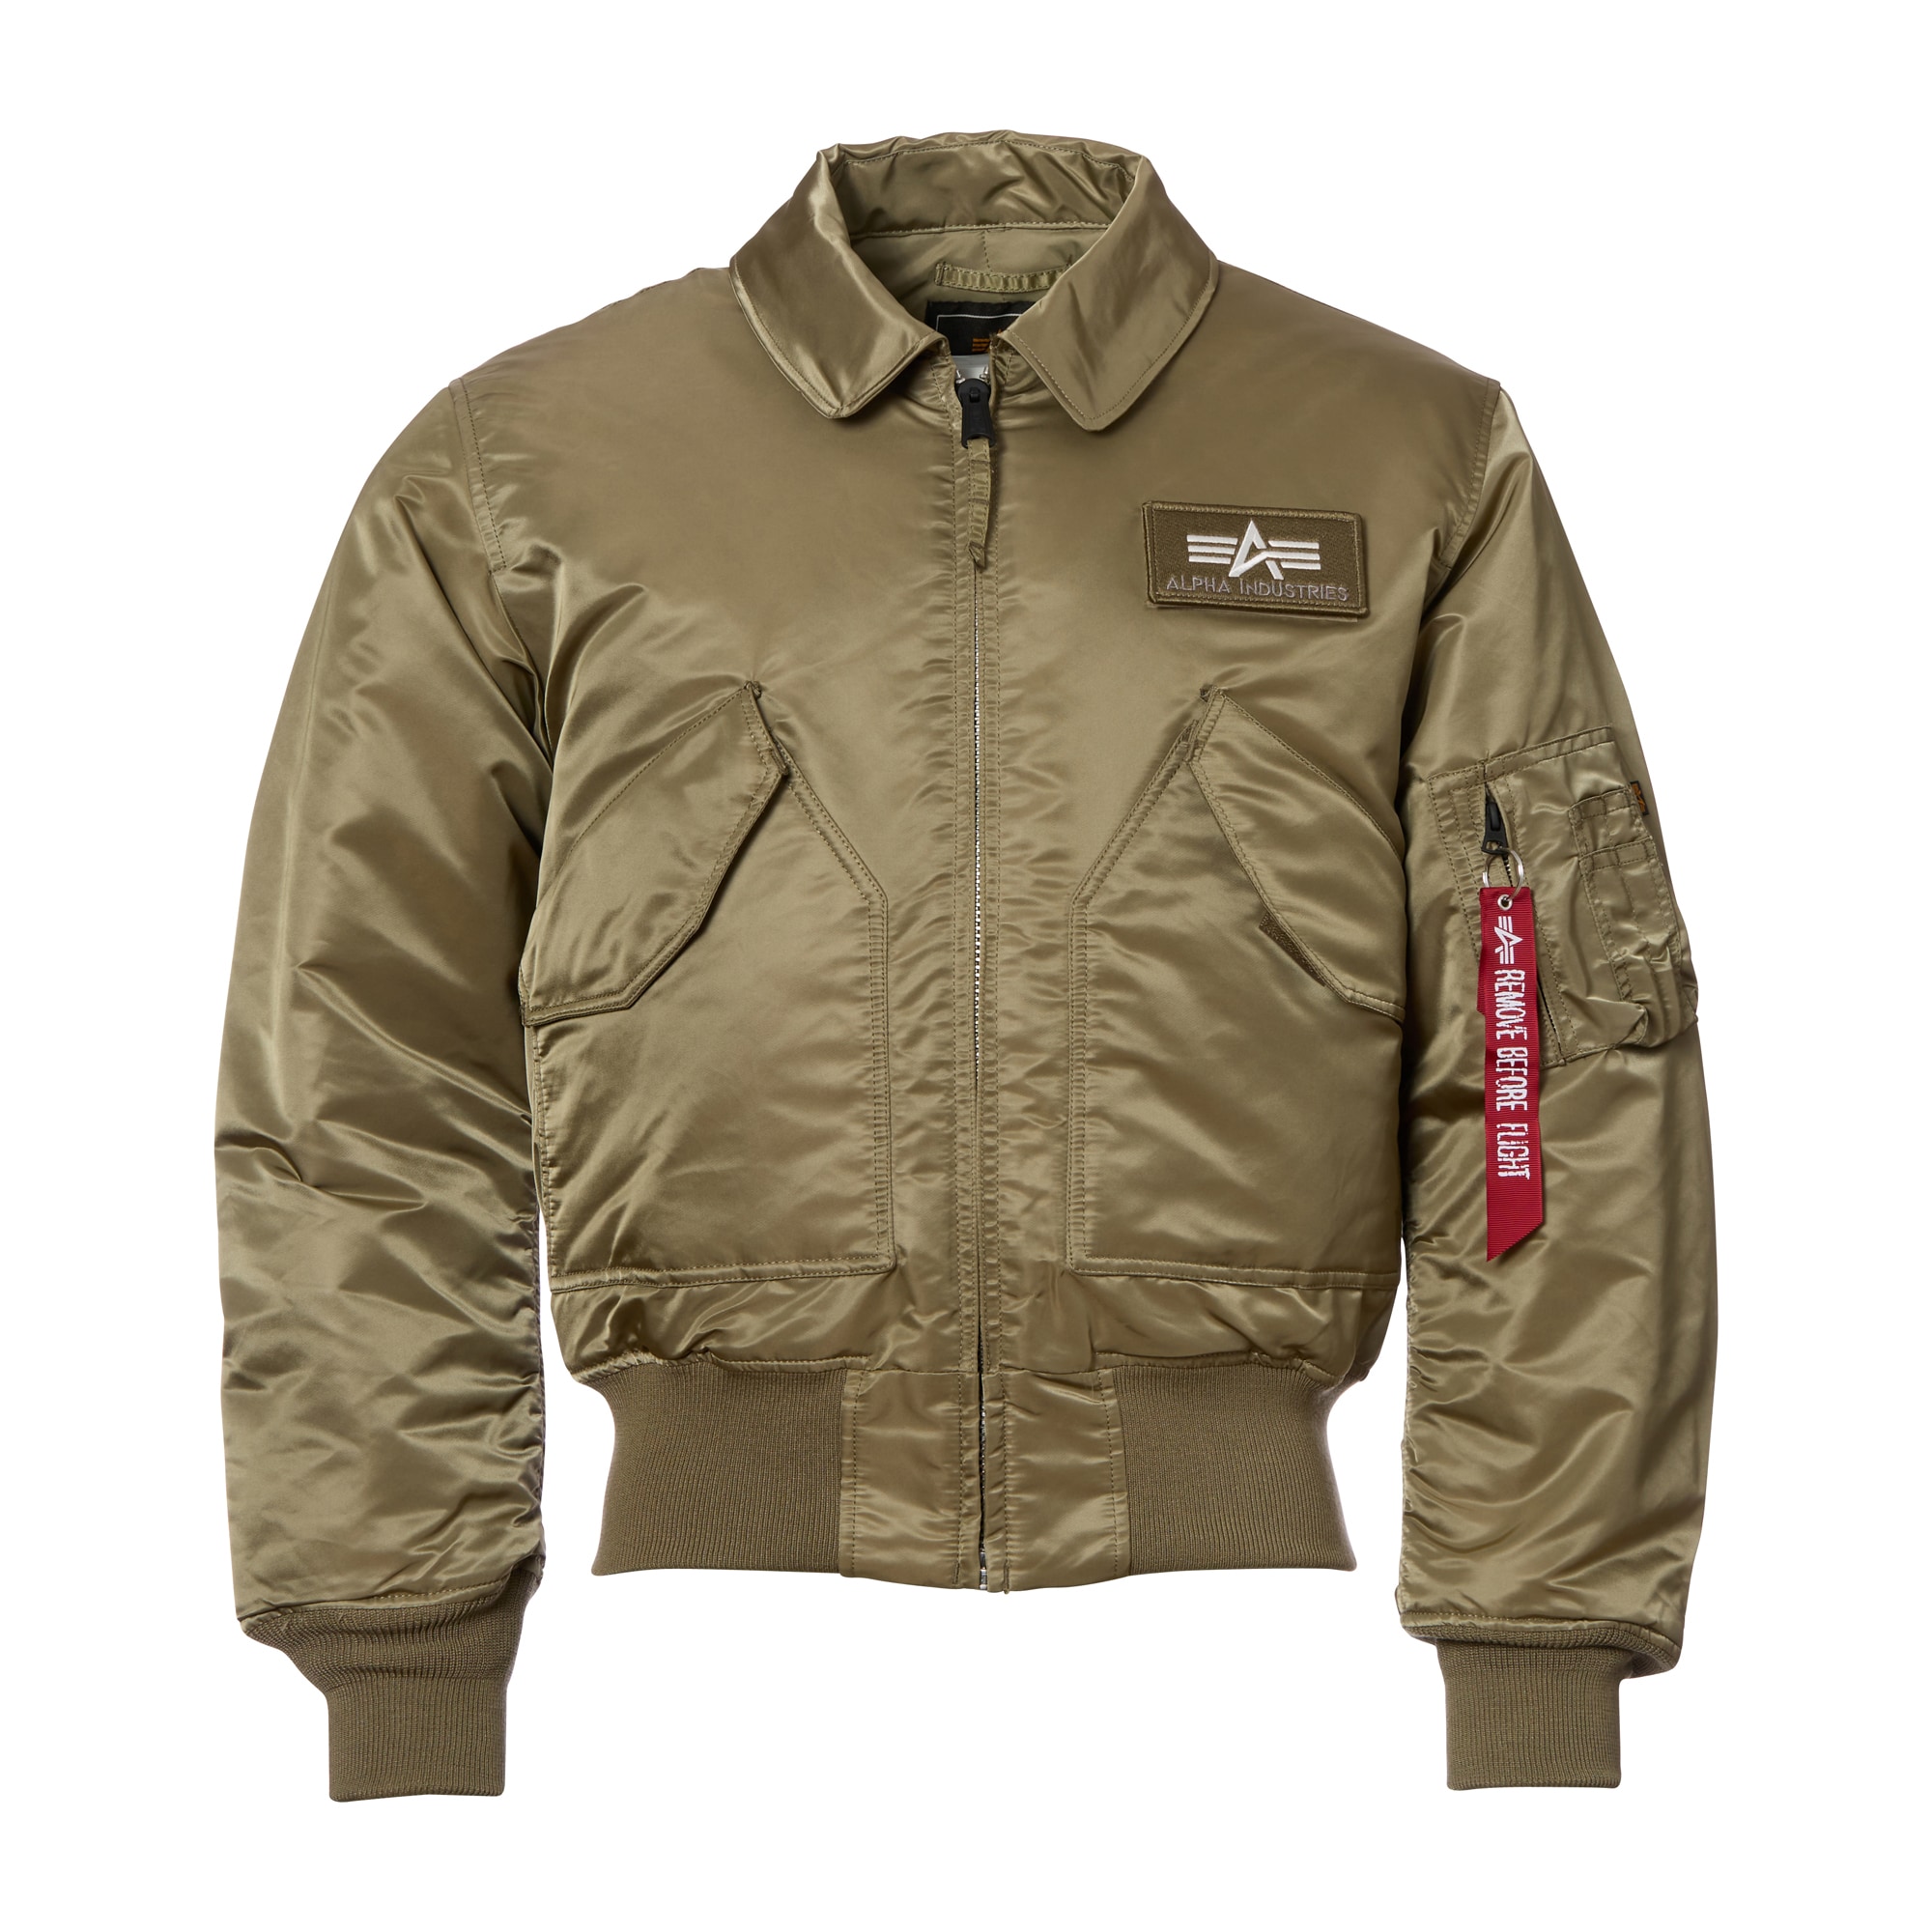 Purchase The Alpha Industries Flight Jacket Cwu 45 Stratos By As